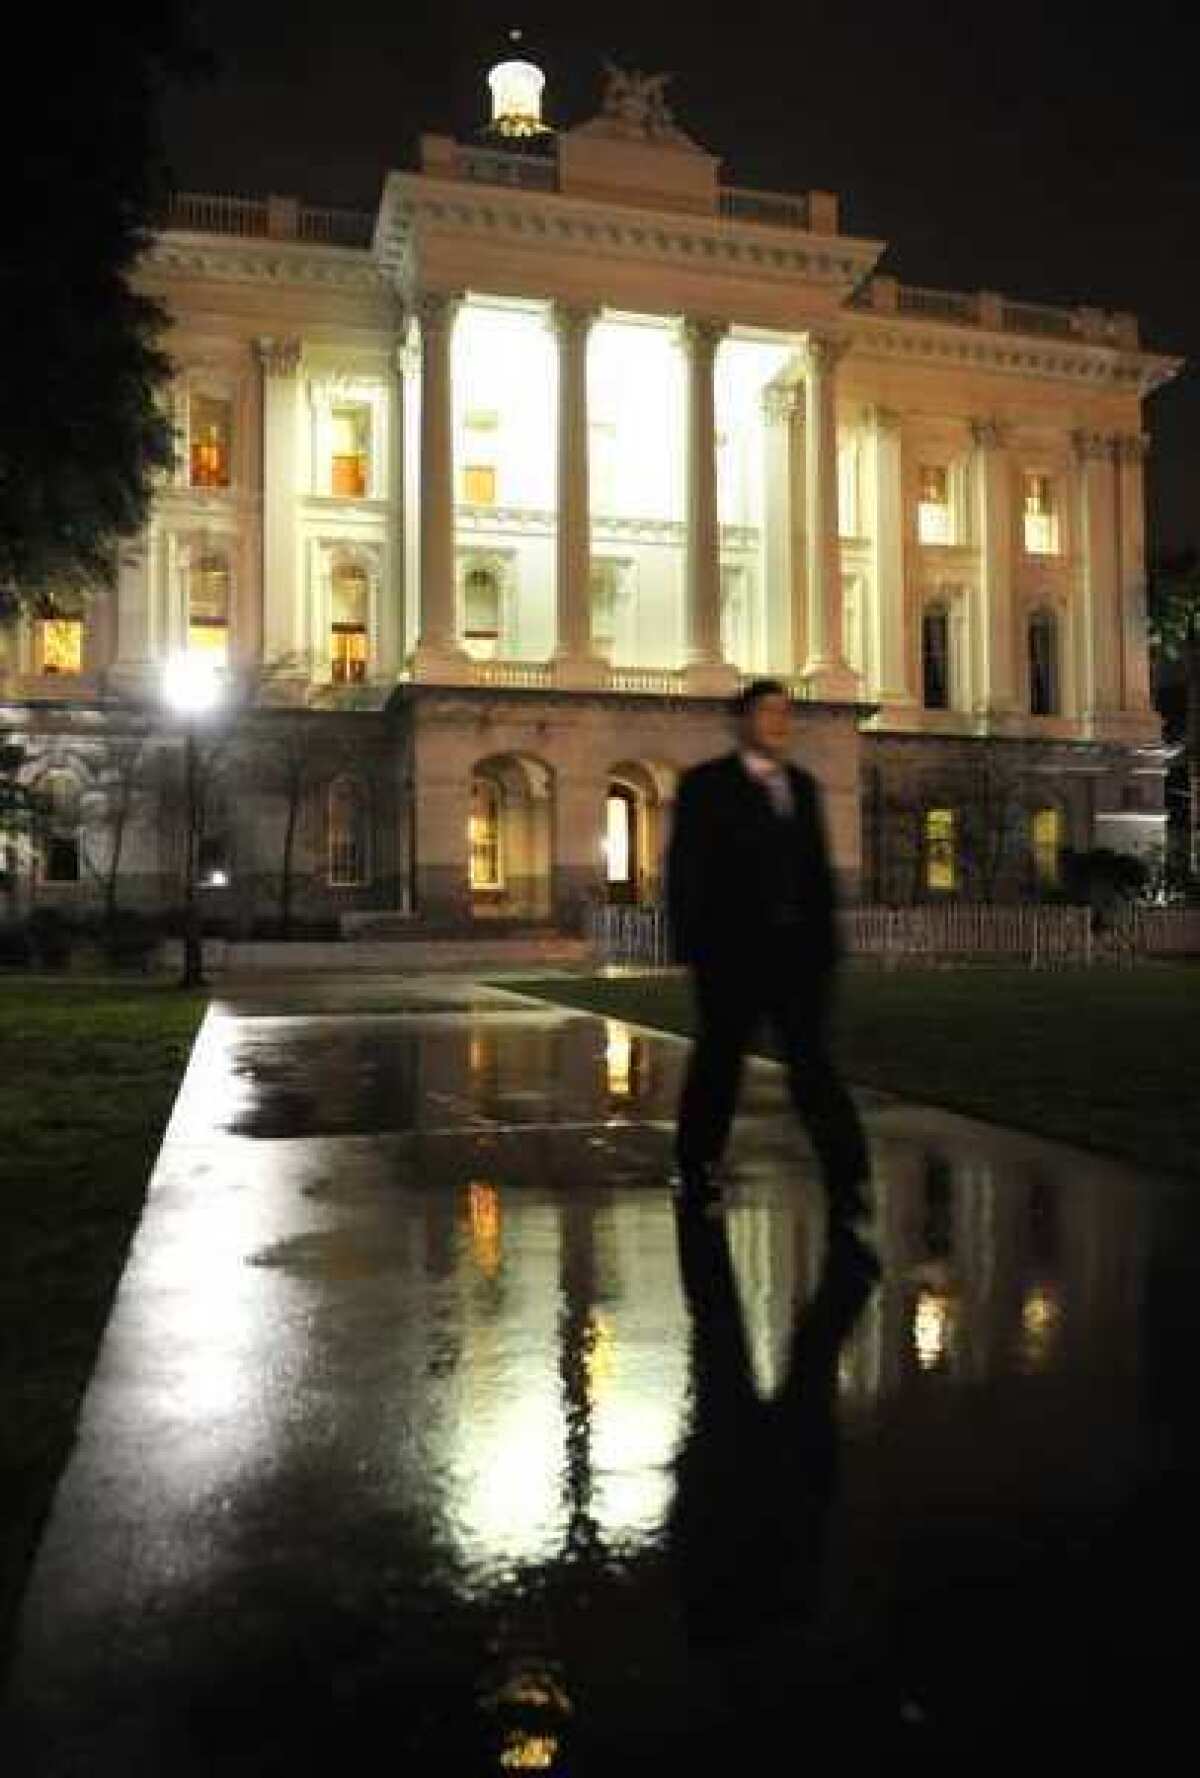 The budget passed Friday by the California Legislature cuts funding for the state's arts grant-making agency by 7.6%.